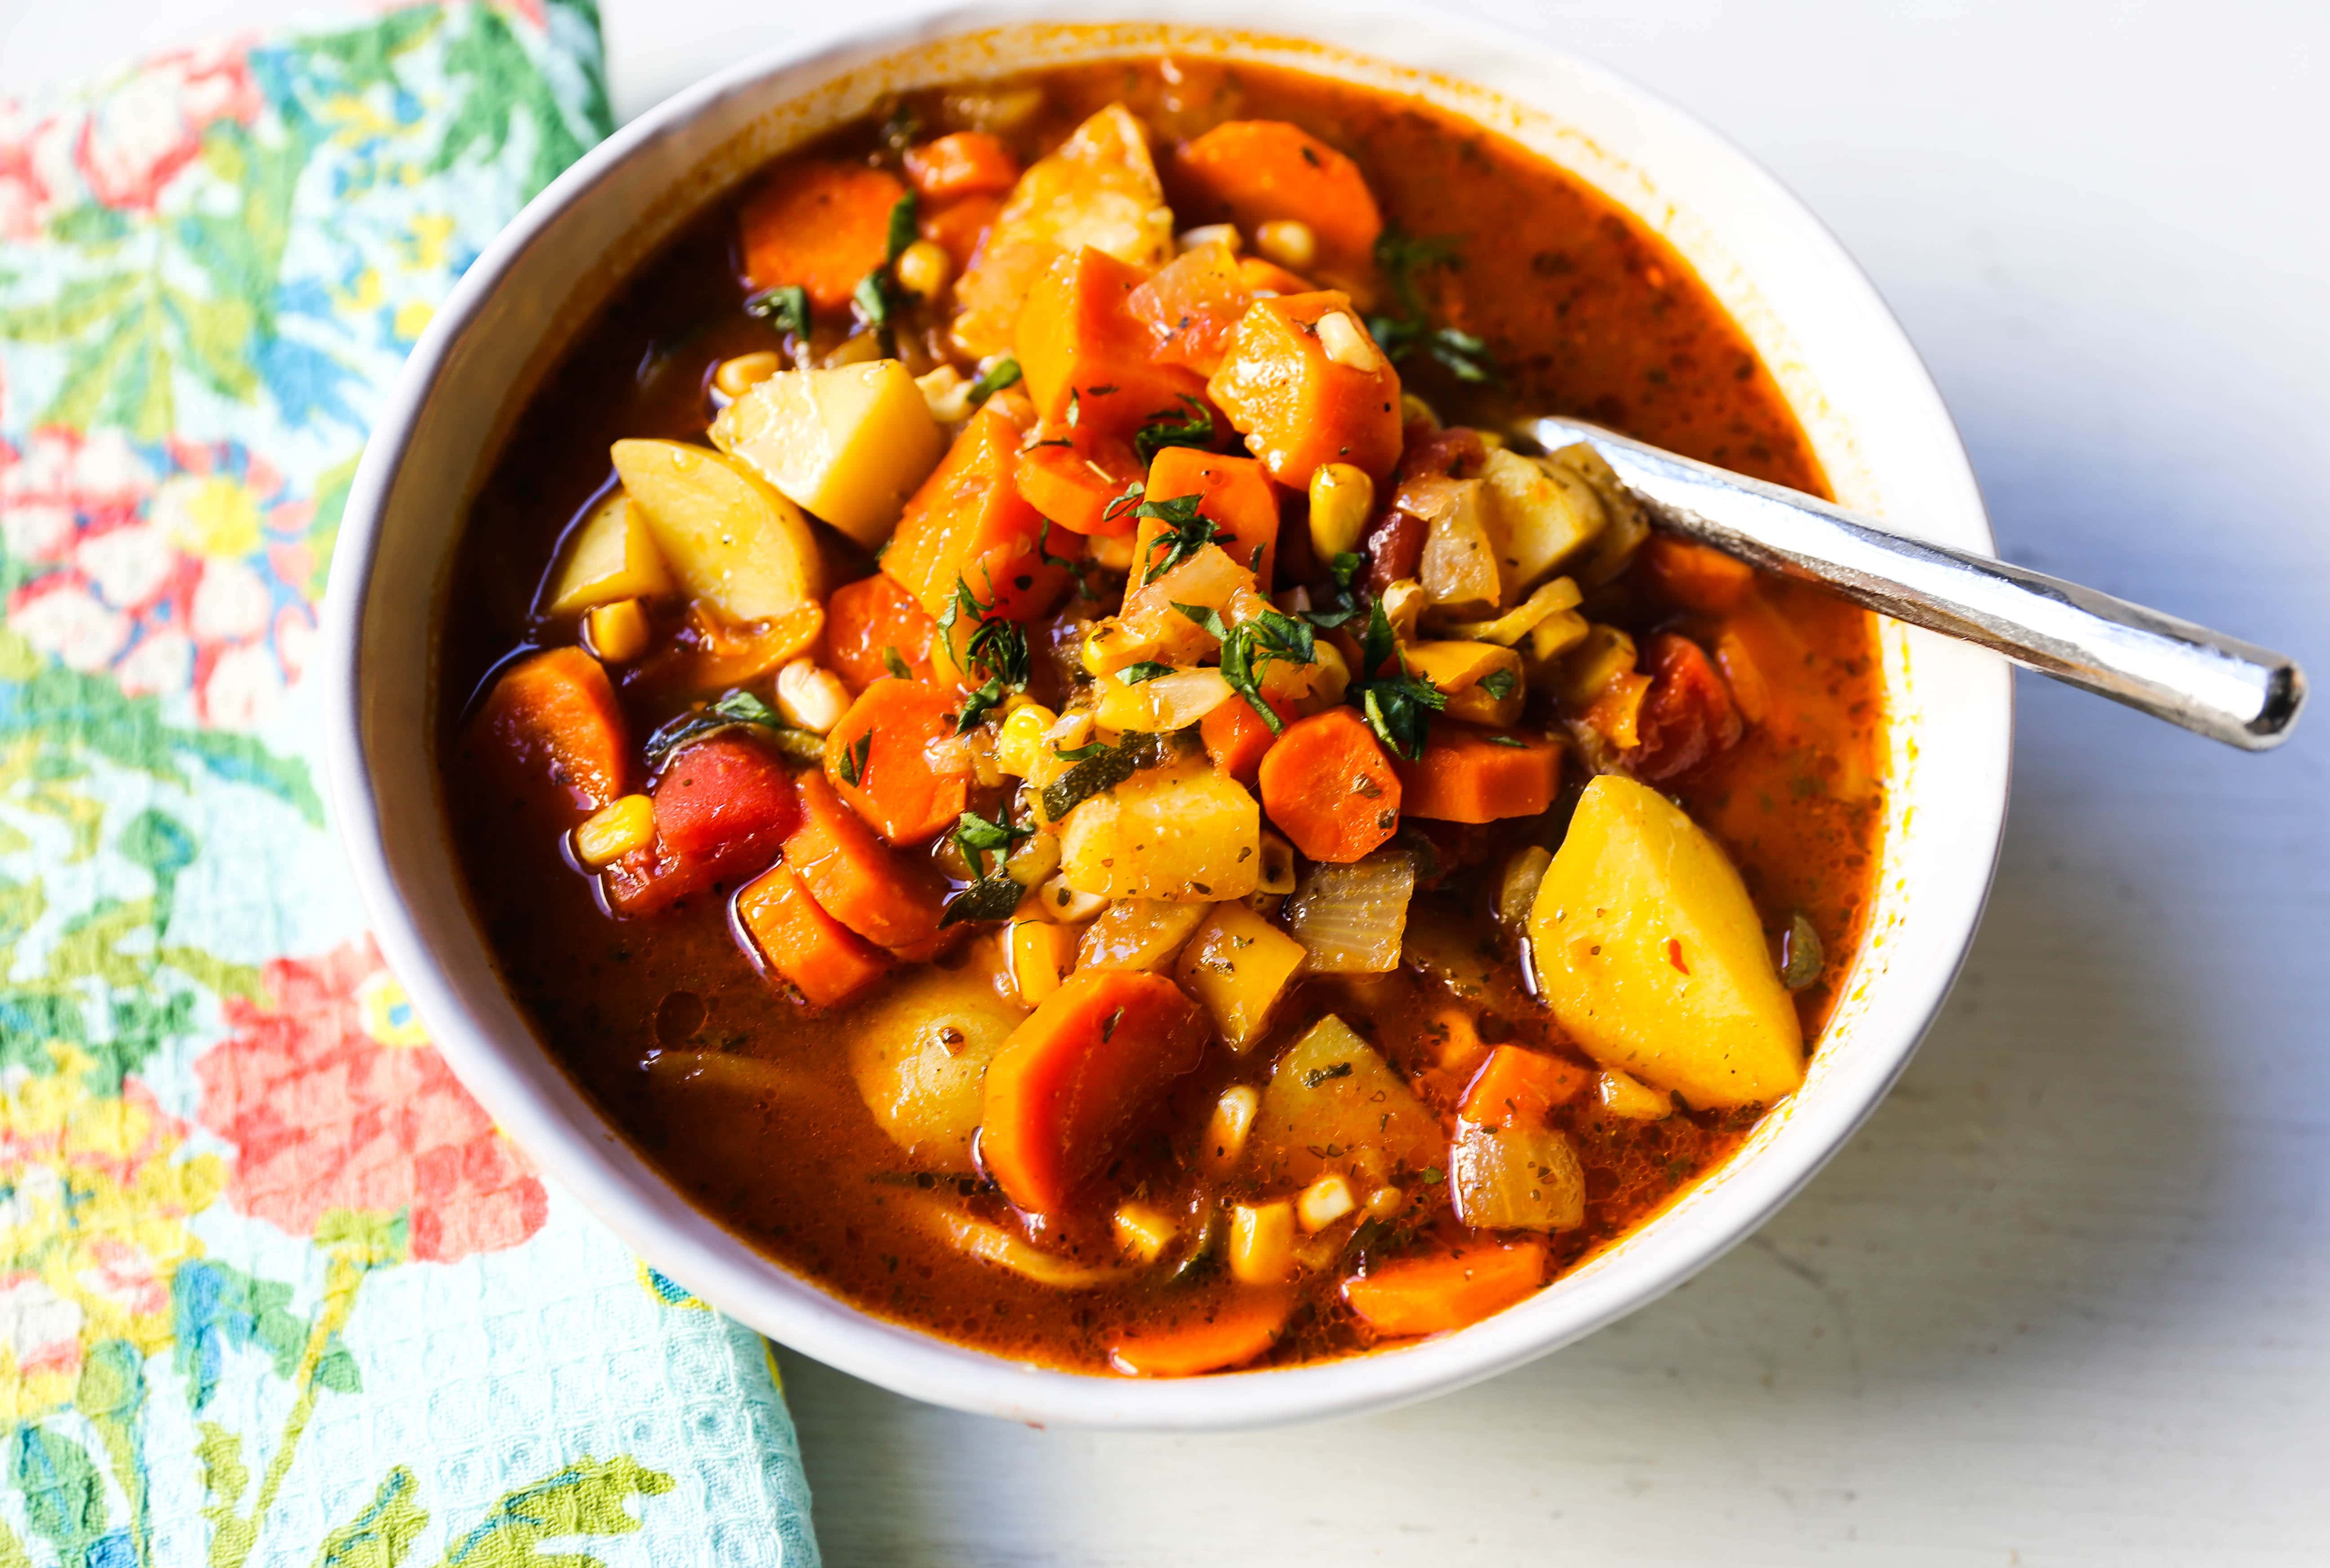 Detox Vegetable Soup. A healthy soup filled with vegetables, herbs, in a warm broth. How to make the best vegetable soup! www.modernhoney.com #vegetablesoup #veggiesoup #soups #soup #healthy